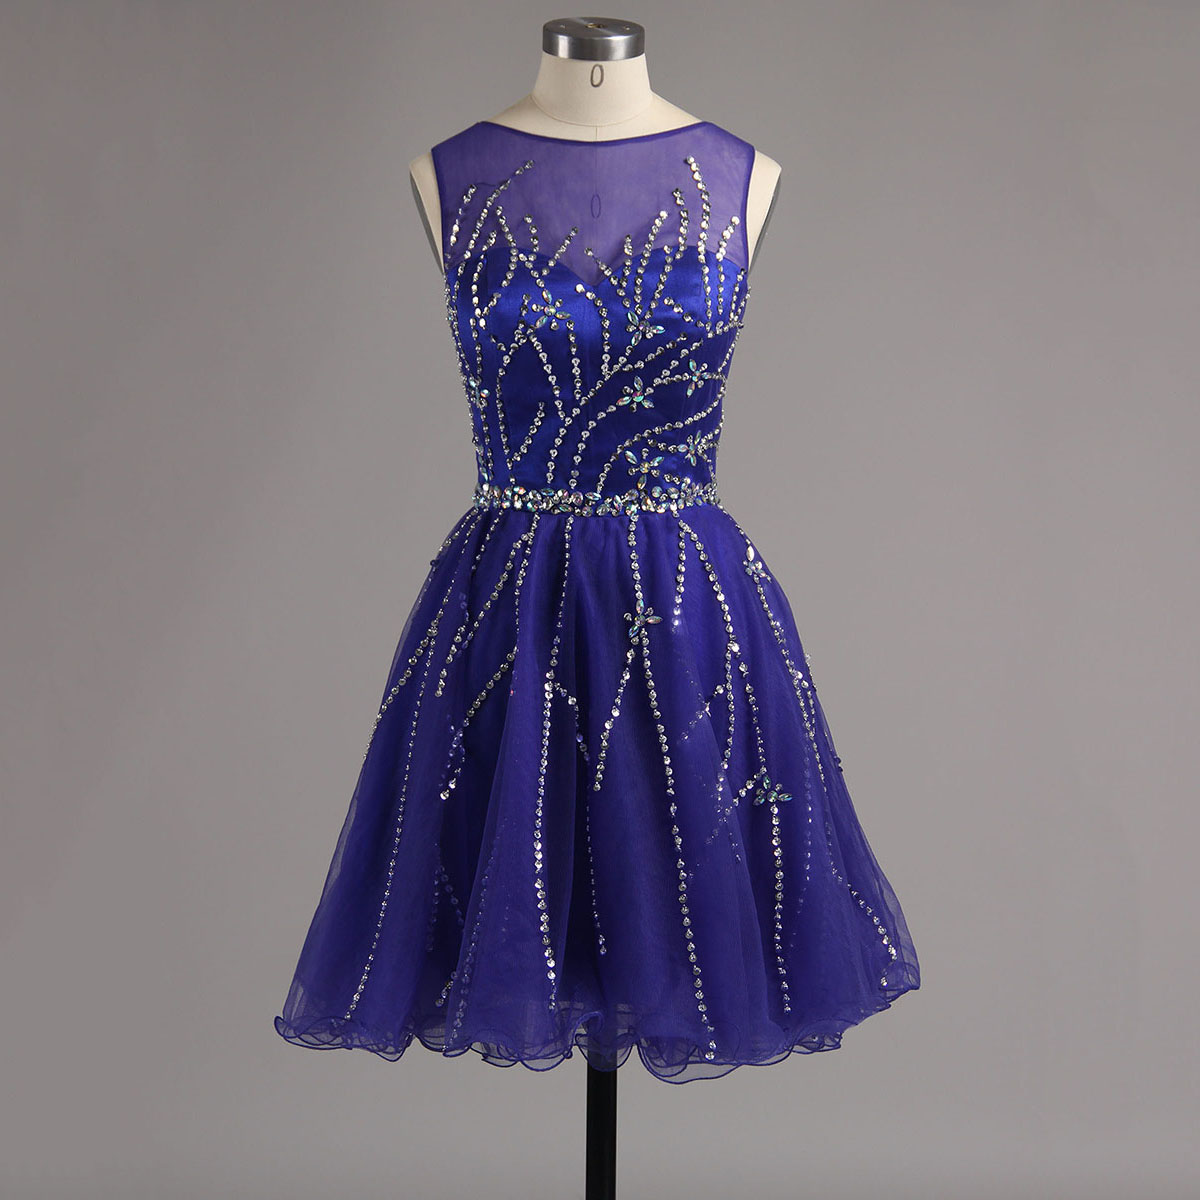 Royal Blue Homecoming Dress With Key Hole Back, Short Beaded Homecoming Dress, Tulle Homecoming Dress With Pleats